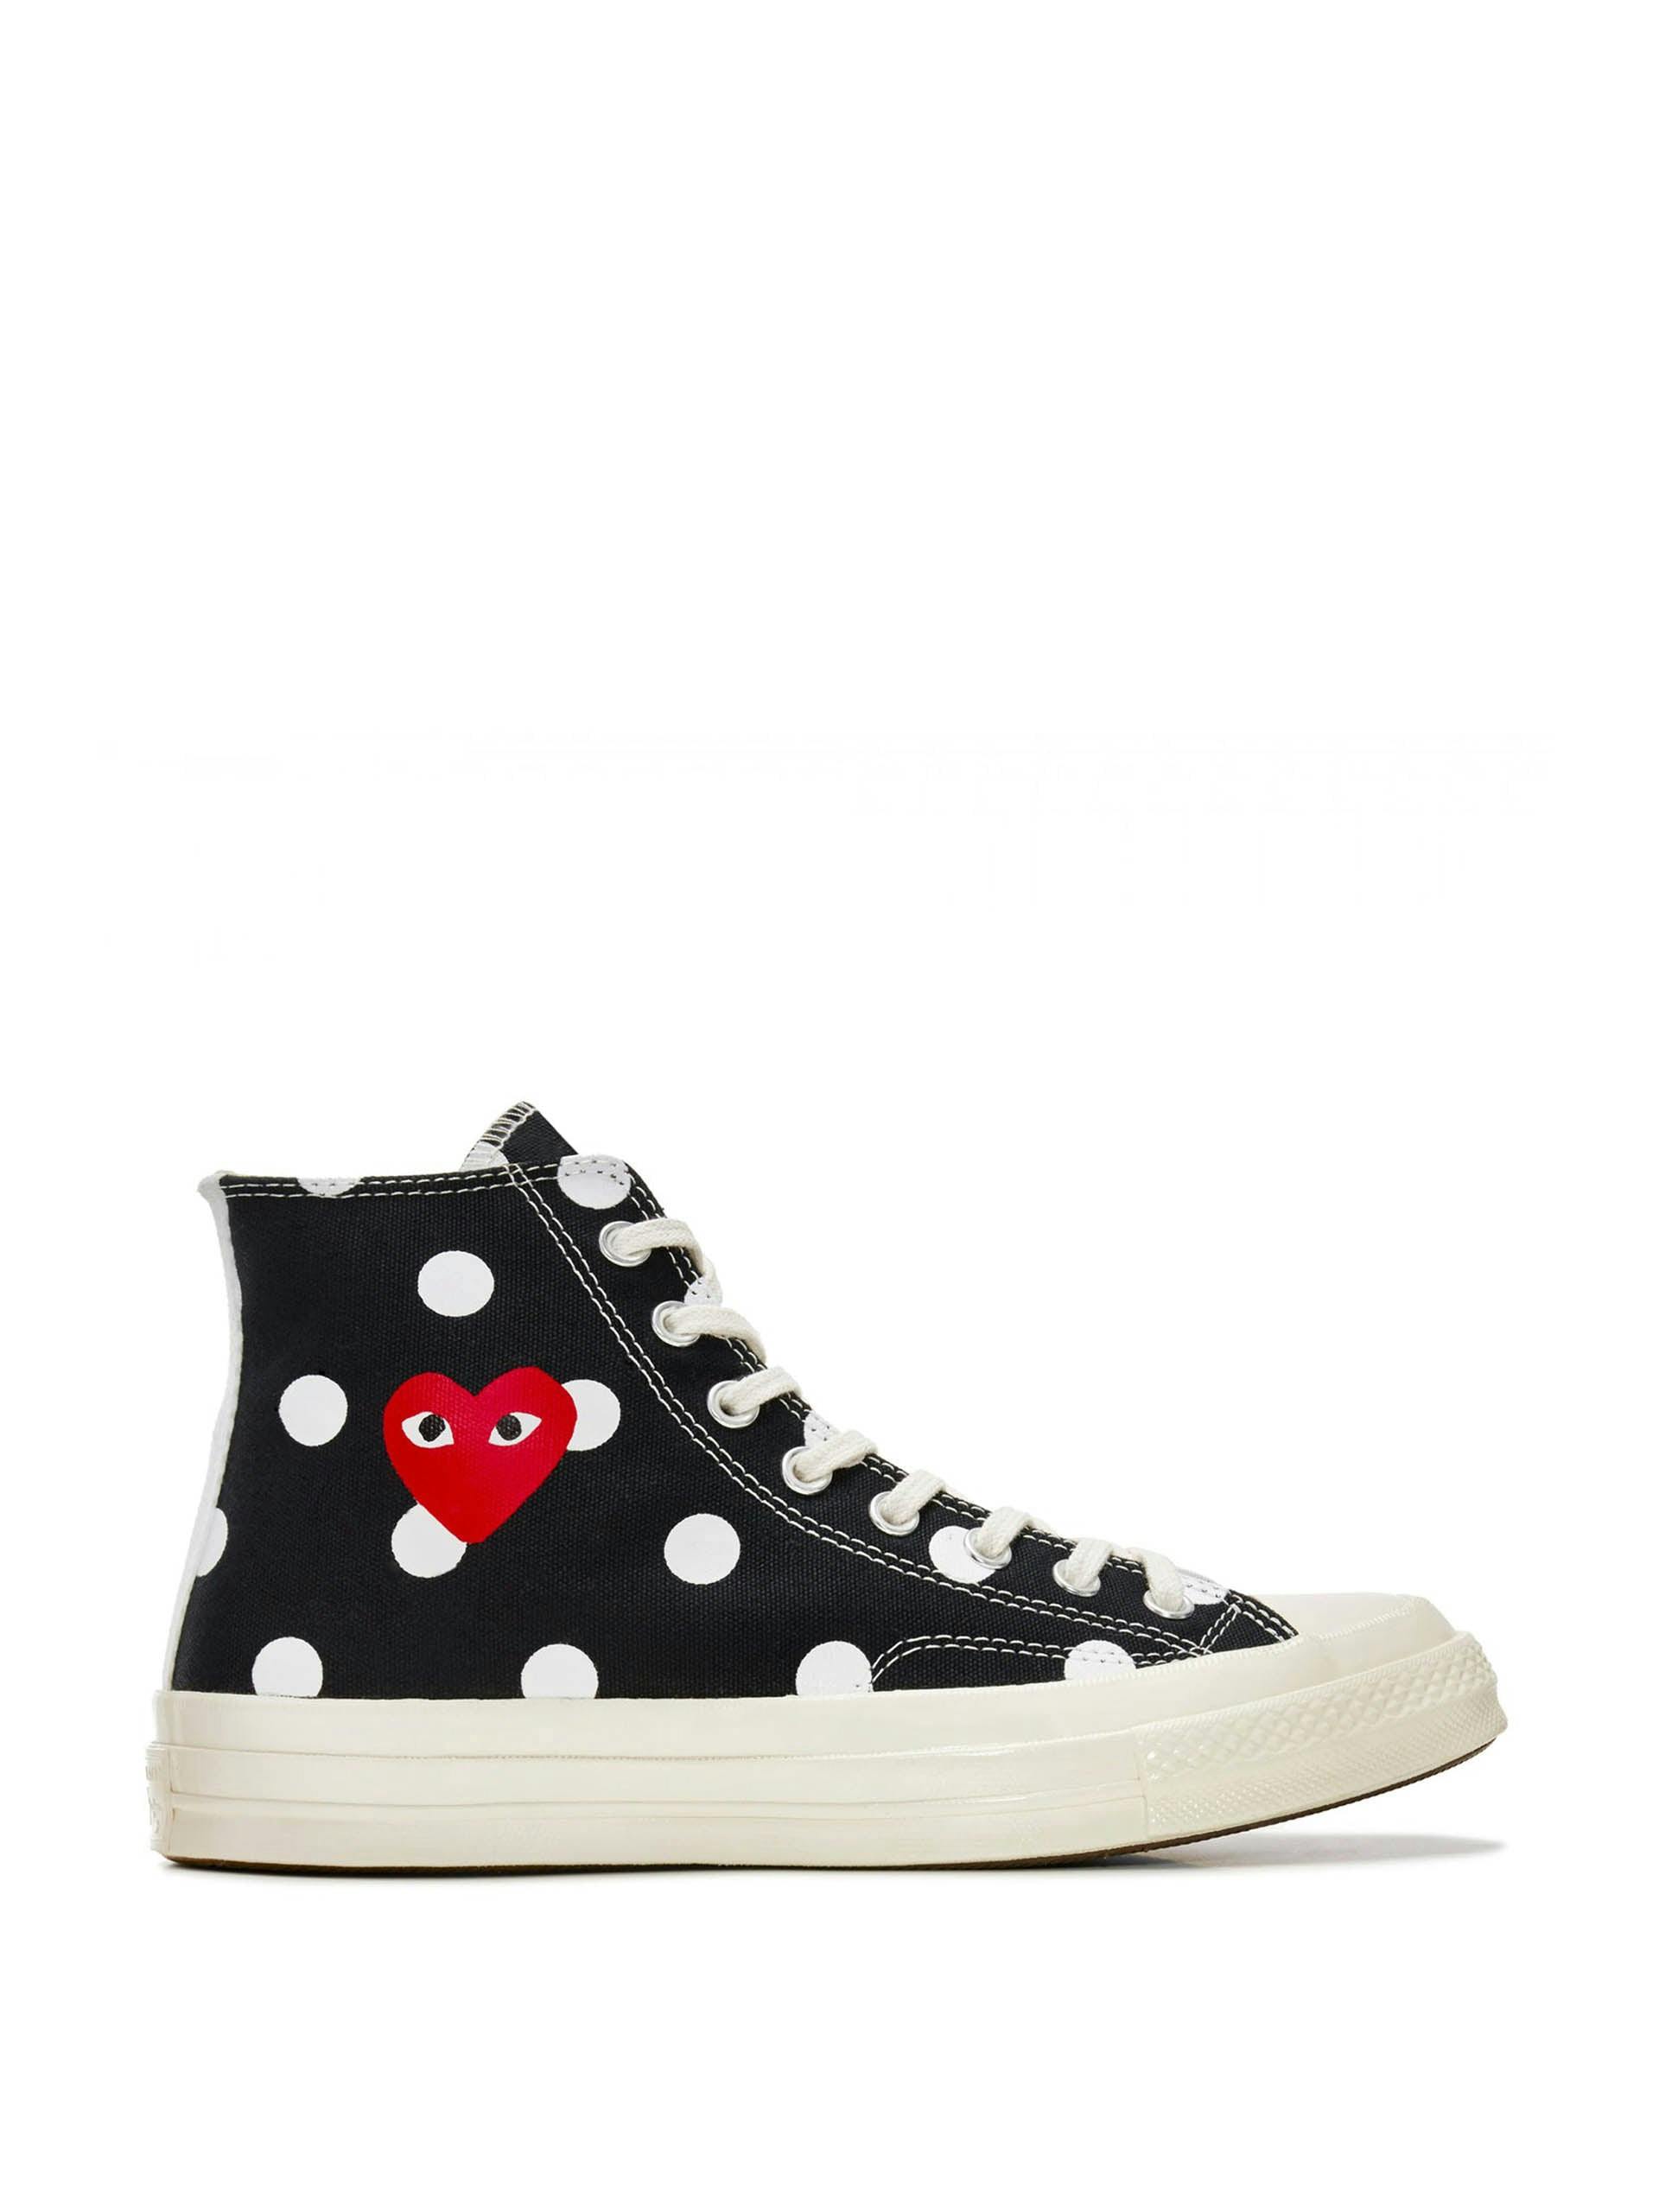 Polka dot red heart Chuck Taylor All Star ’70 high sneakers